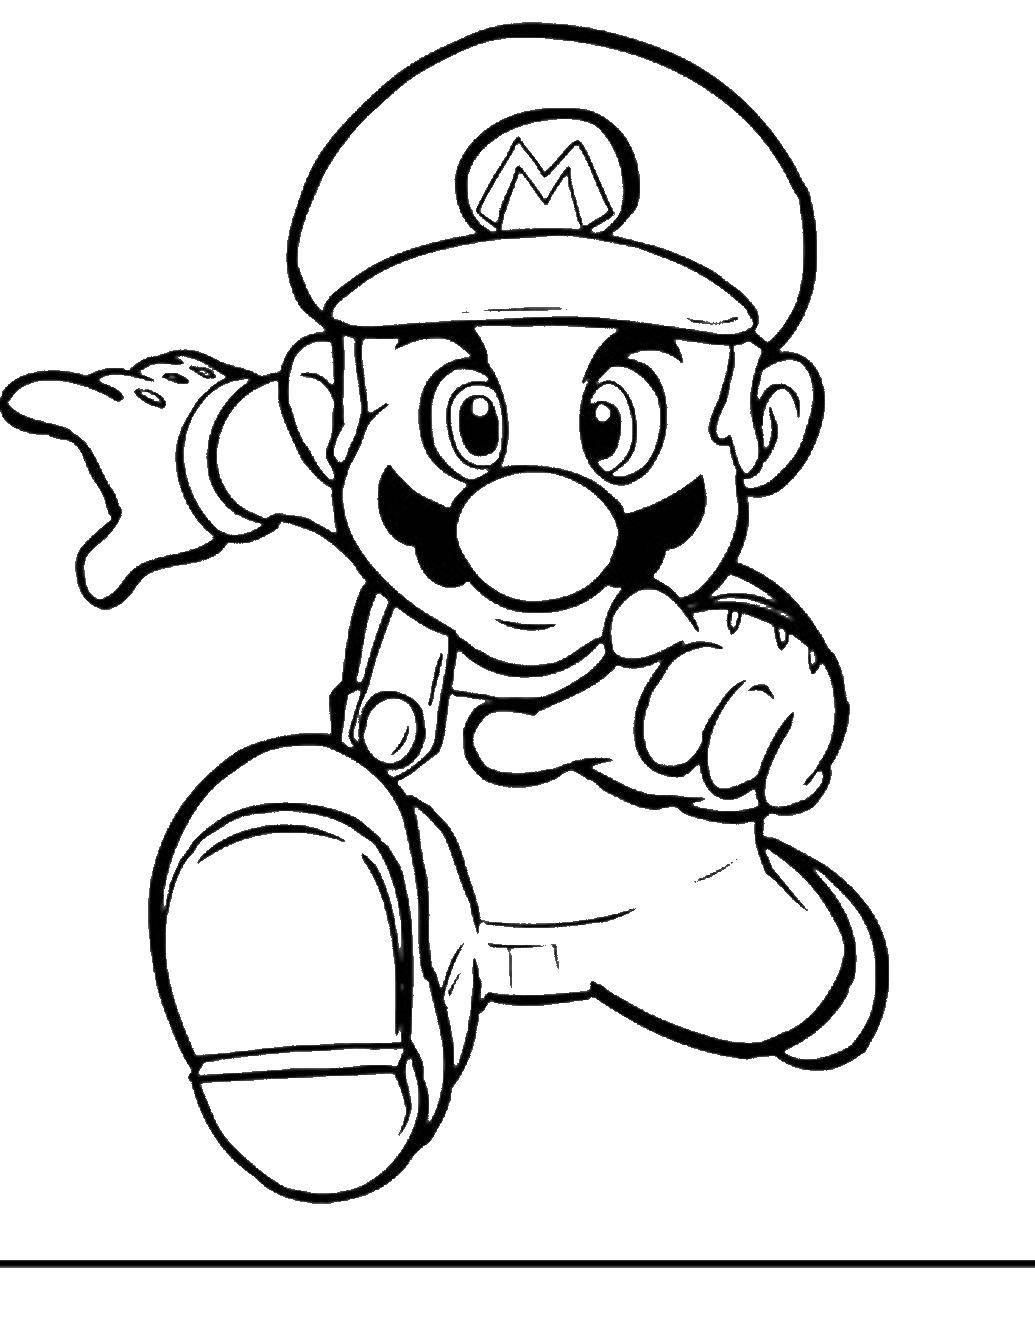 Coloring Super Mario. Category The character from the game. Tags:  super Mario.